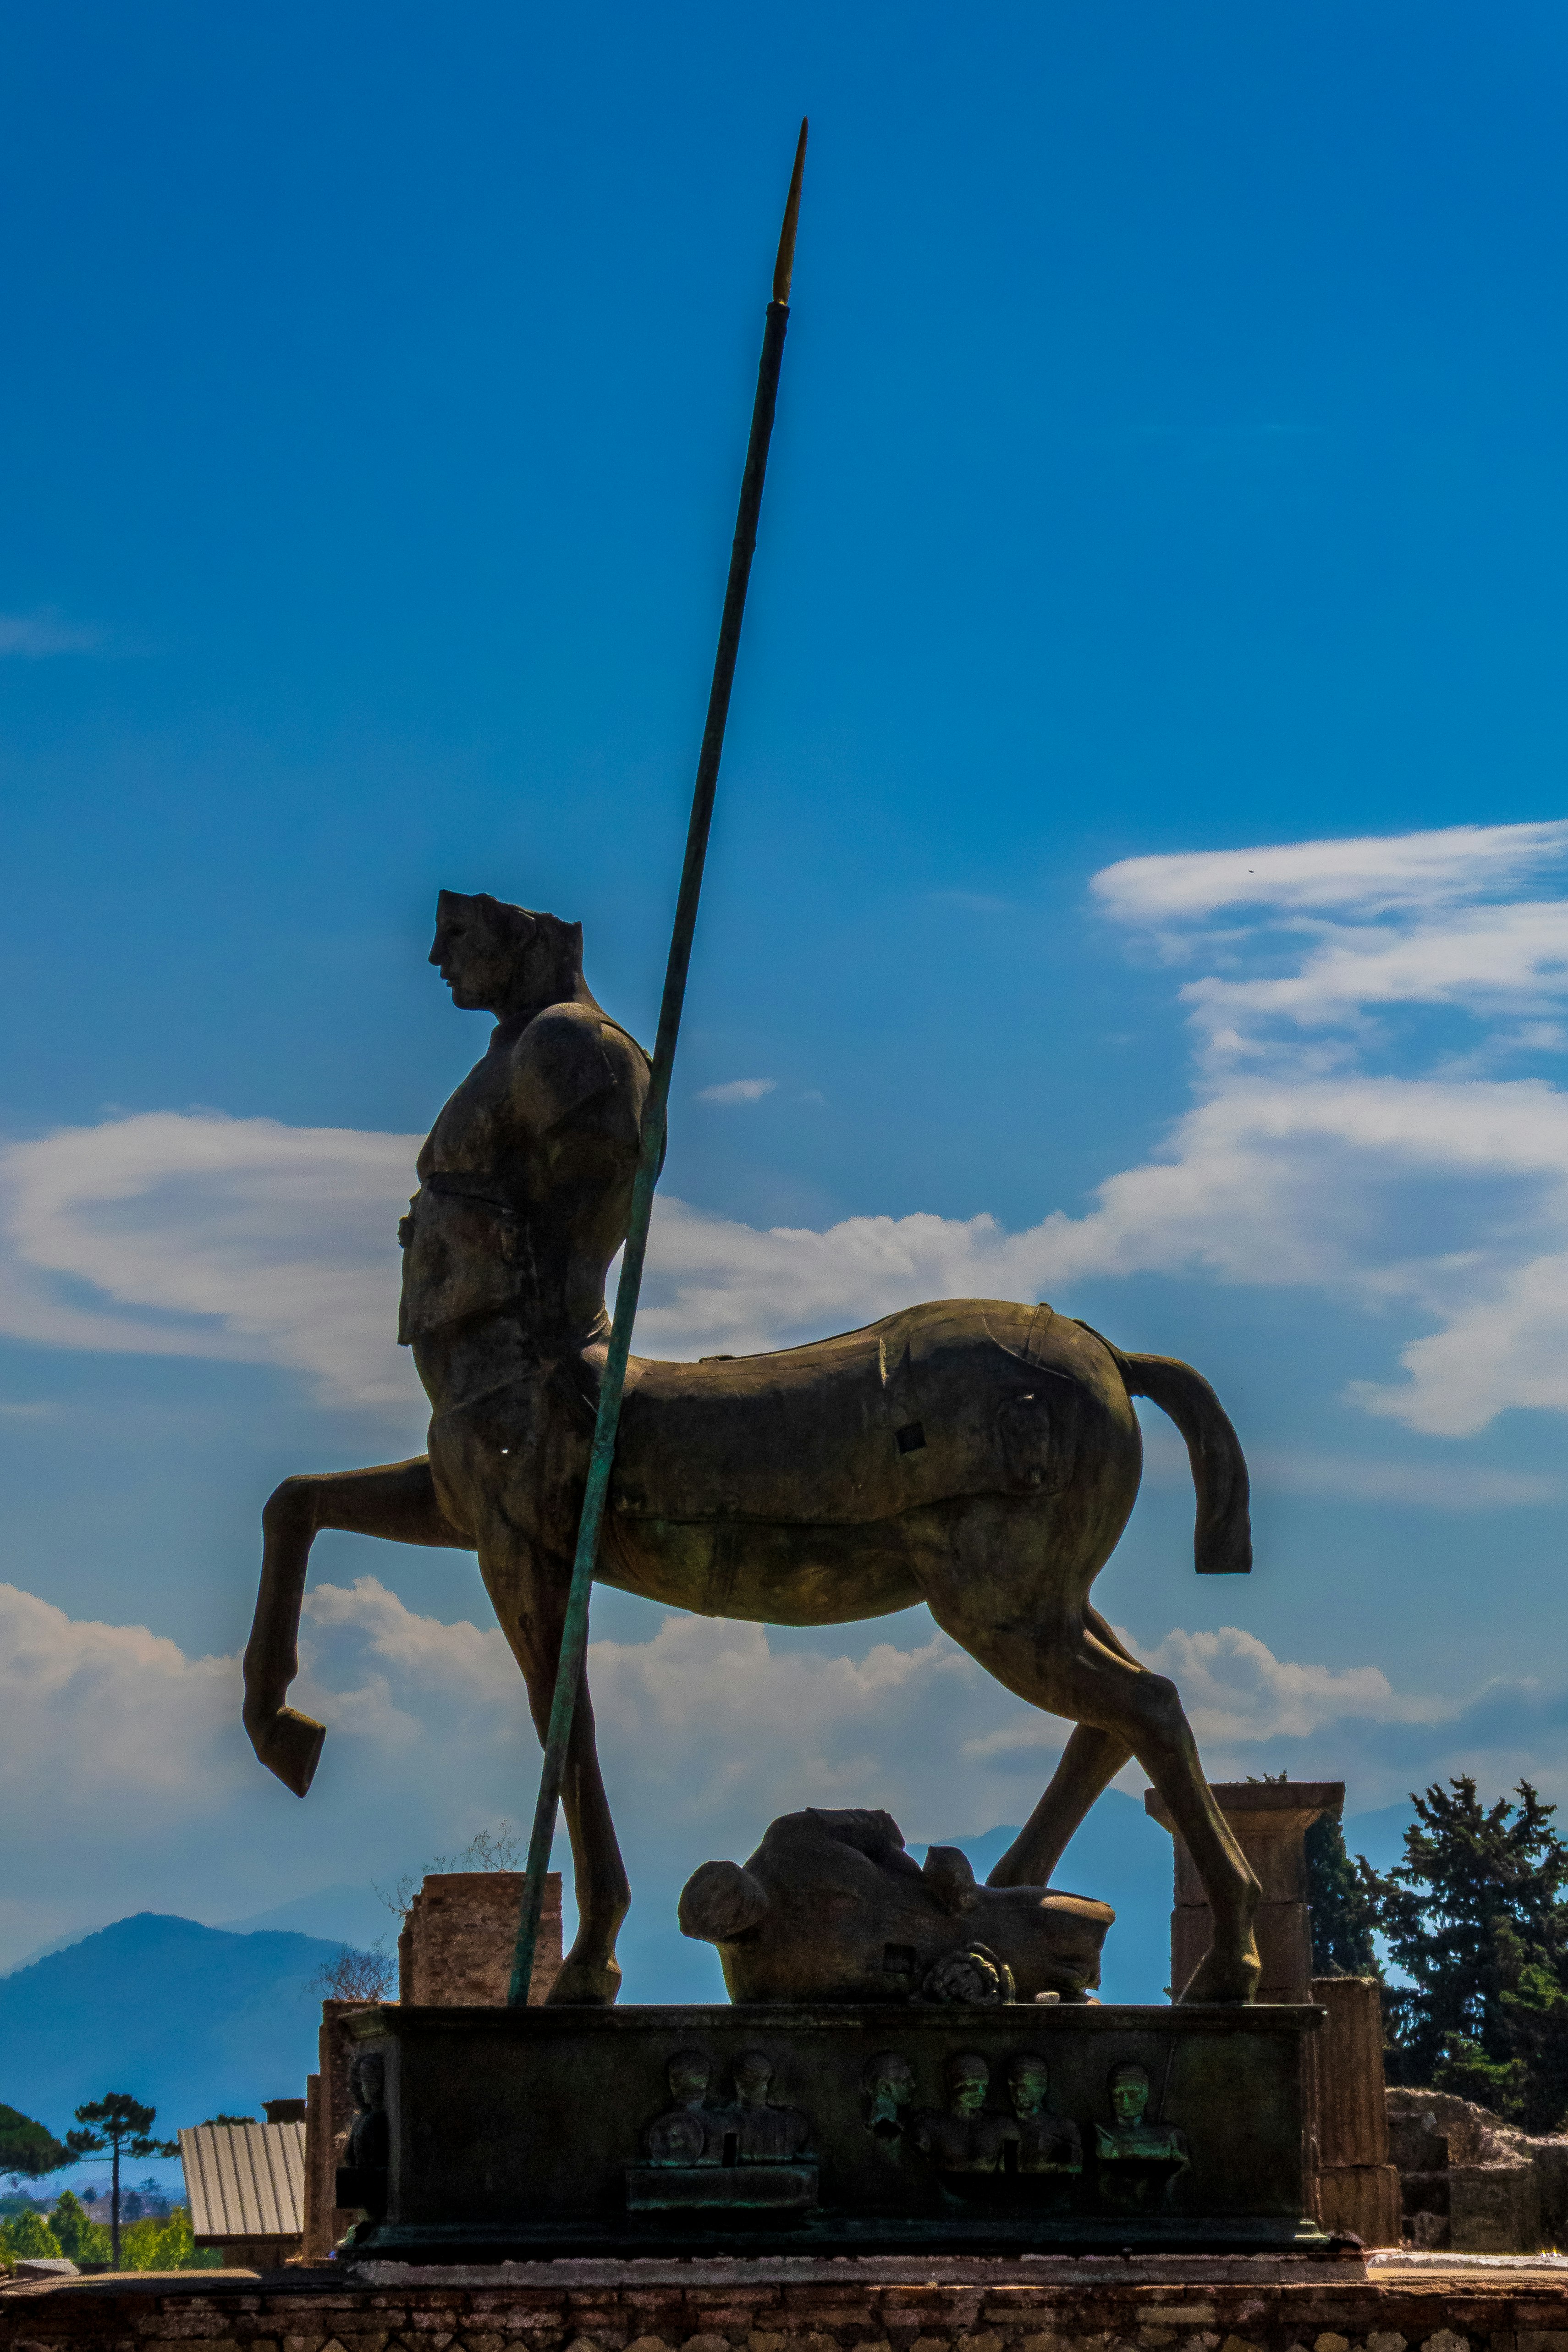 A modern day statue, made to look historic at Pompeii, Italy, with Mount Vesuvius in the background.